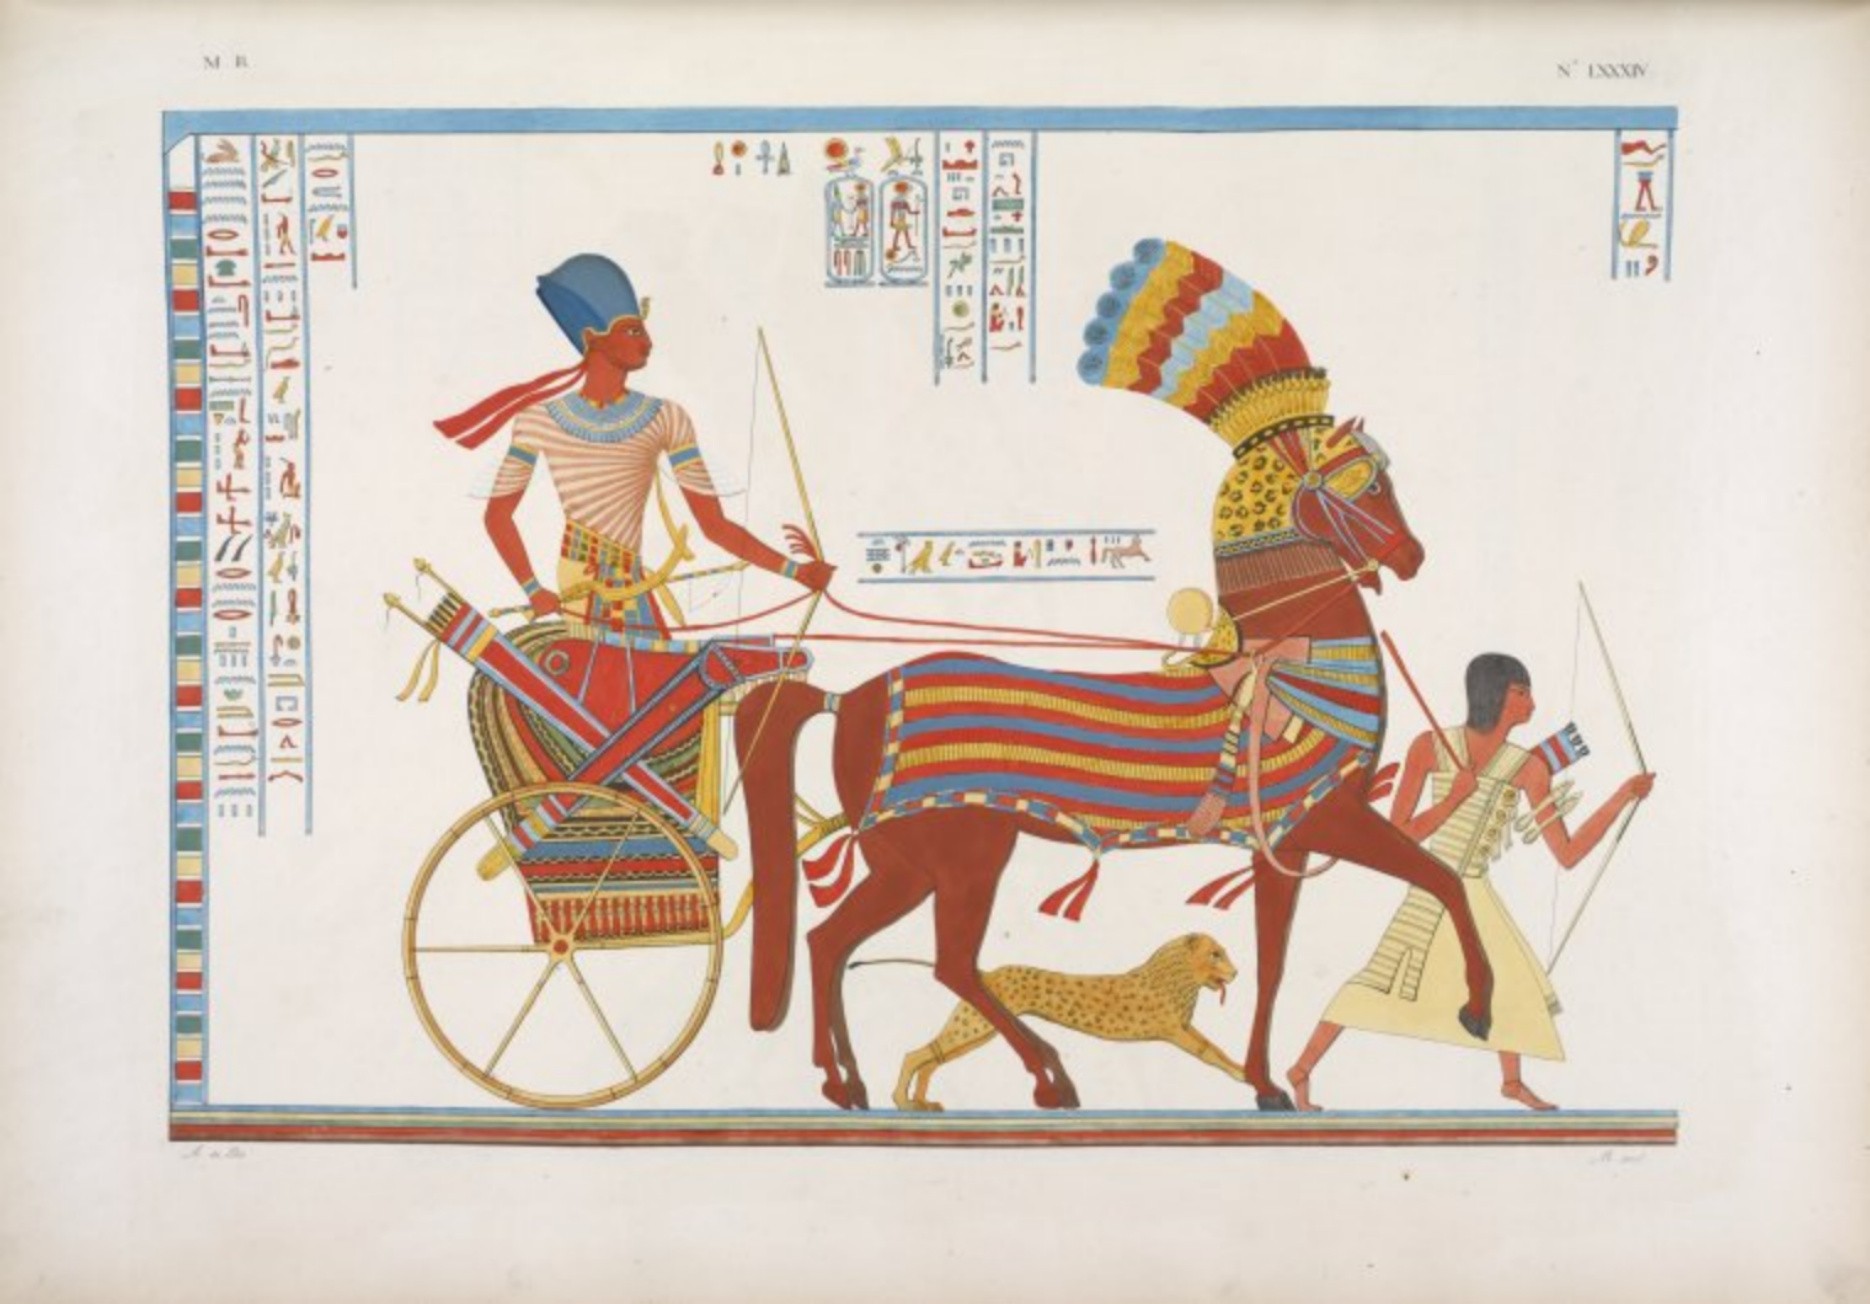 Ramses II triumphant on an Egyptian chariot